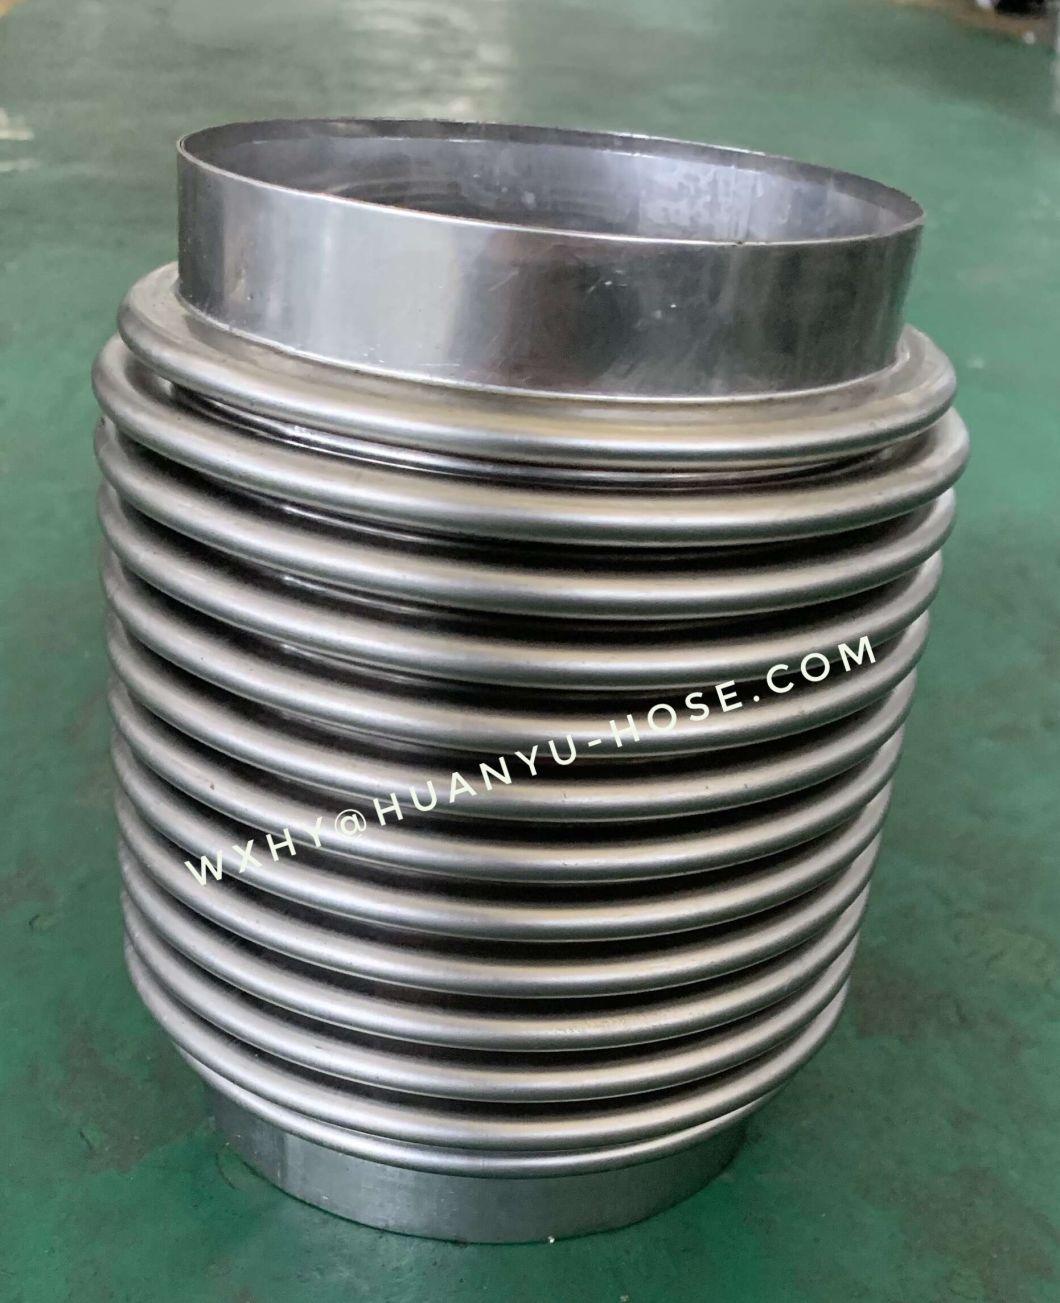 Exhaust Stainless Steel Bellow for Car